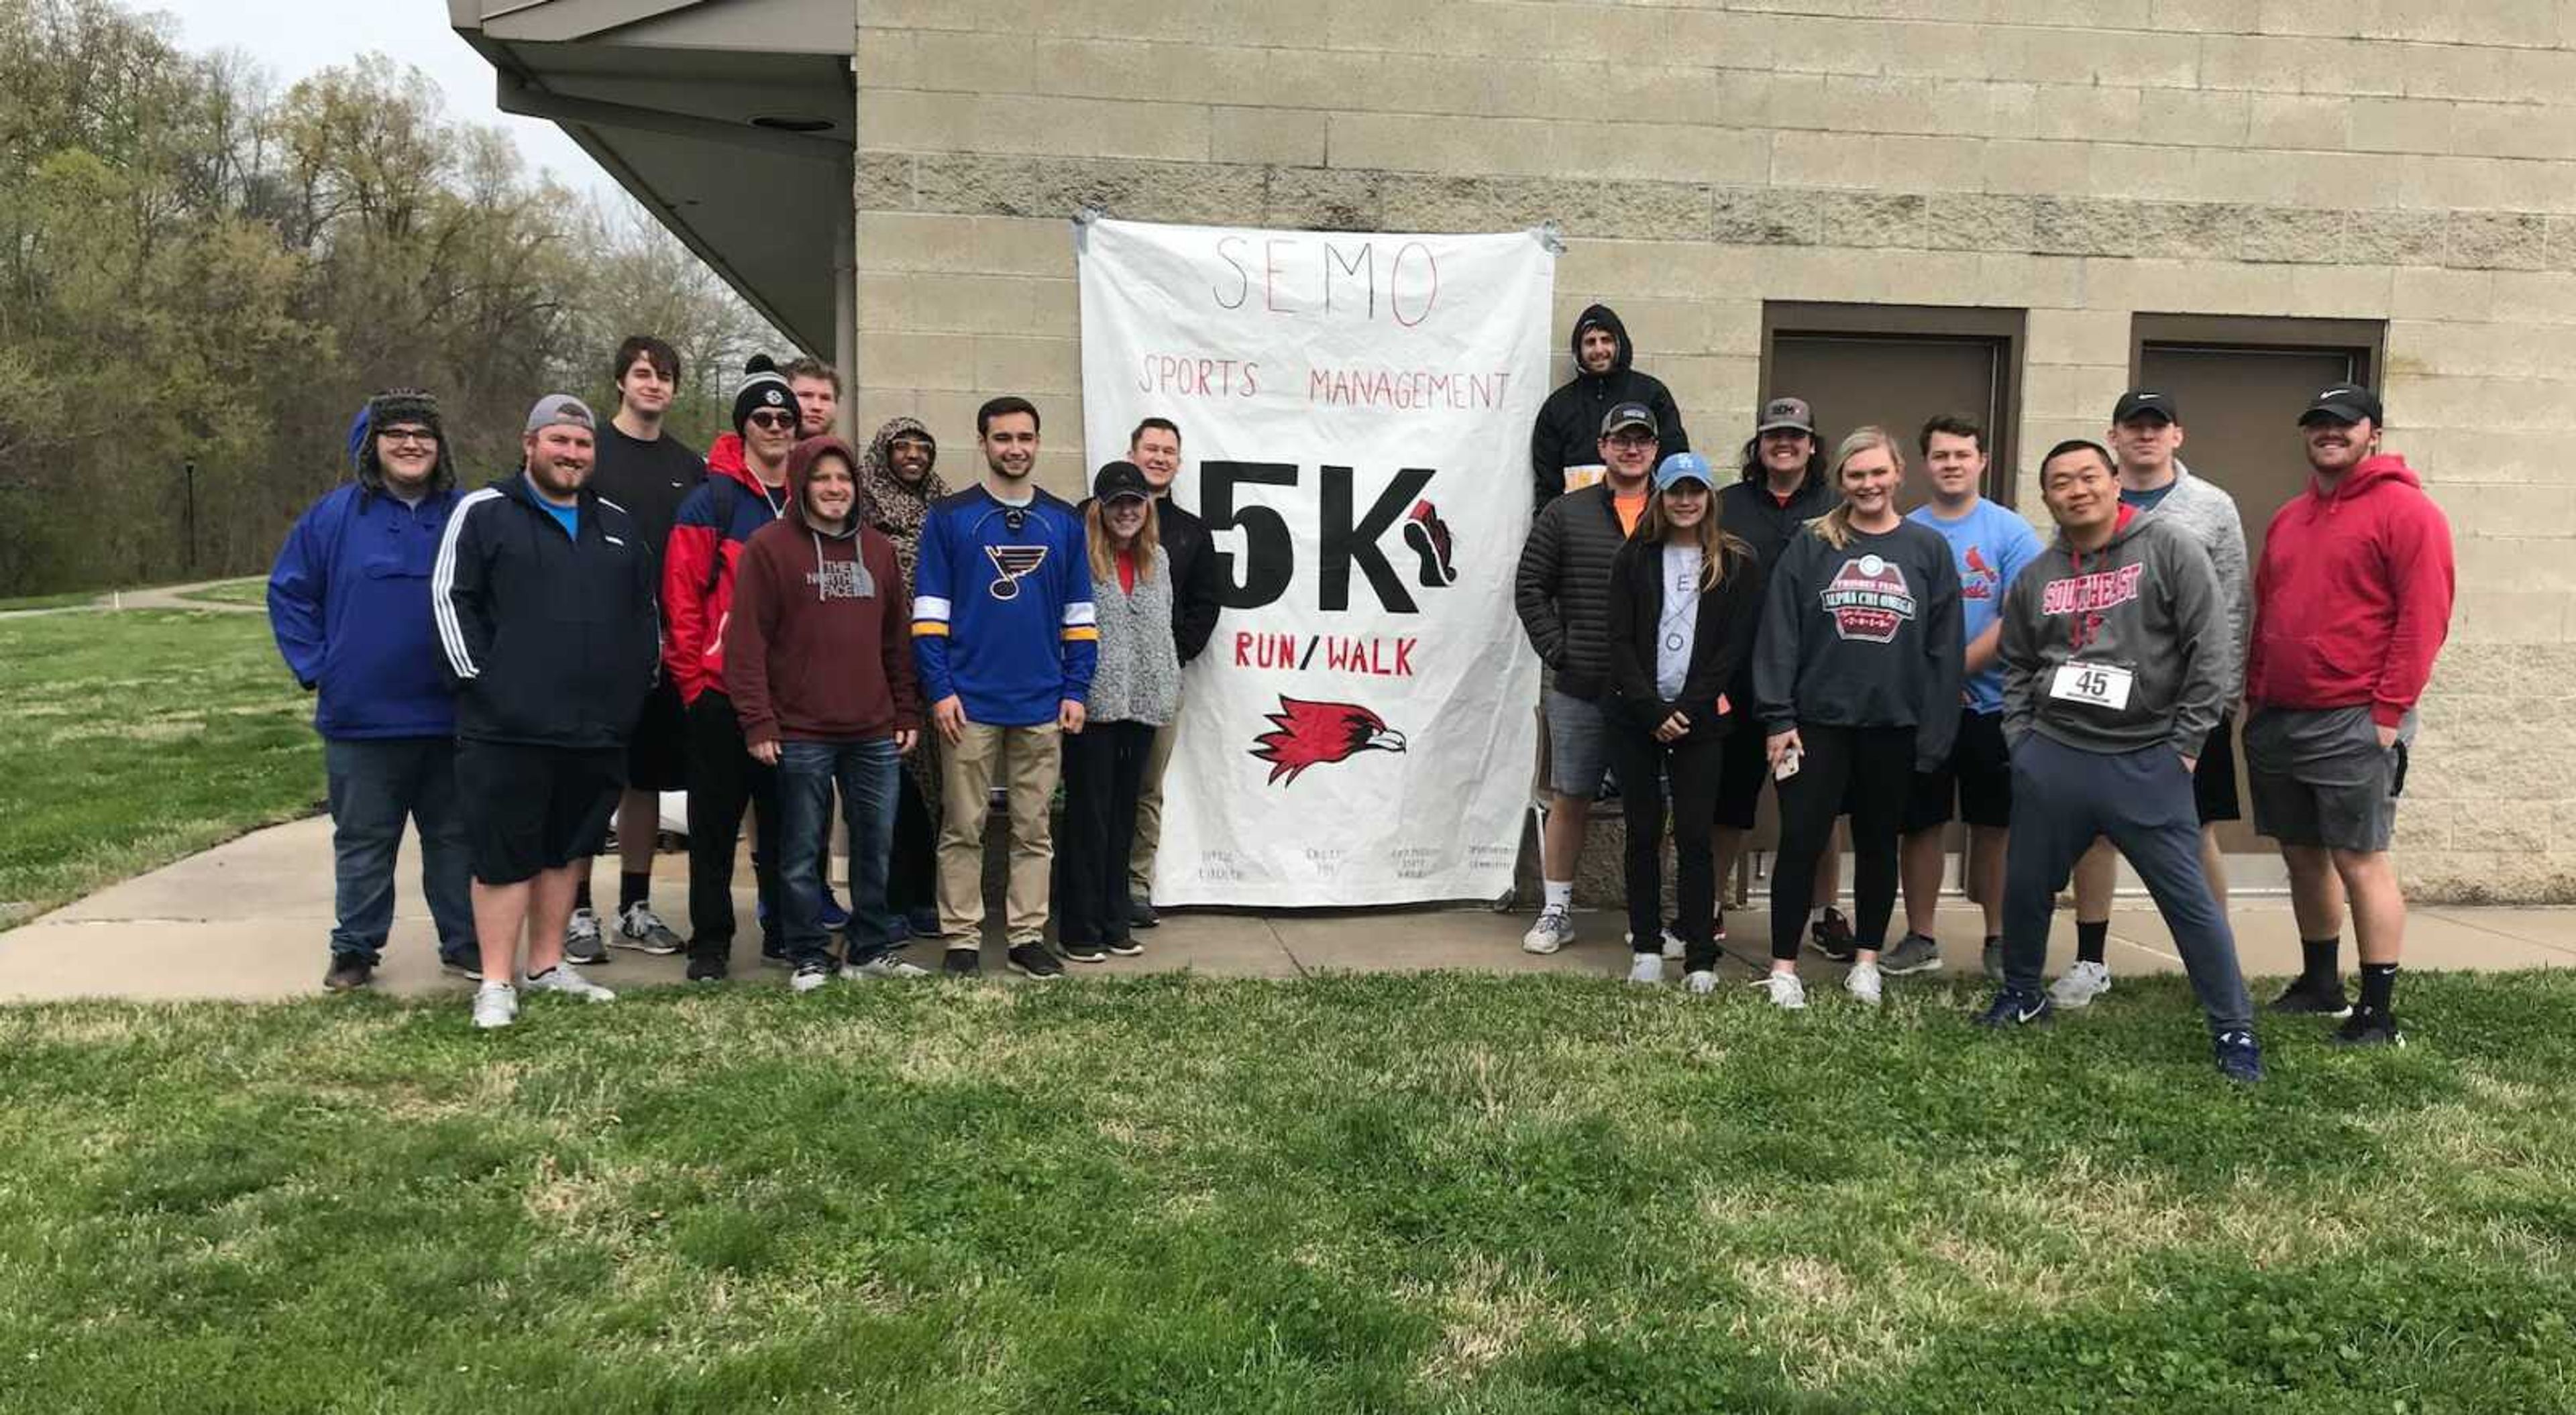 Sports Management kicked off the Annual 5K on Saturday